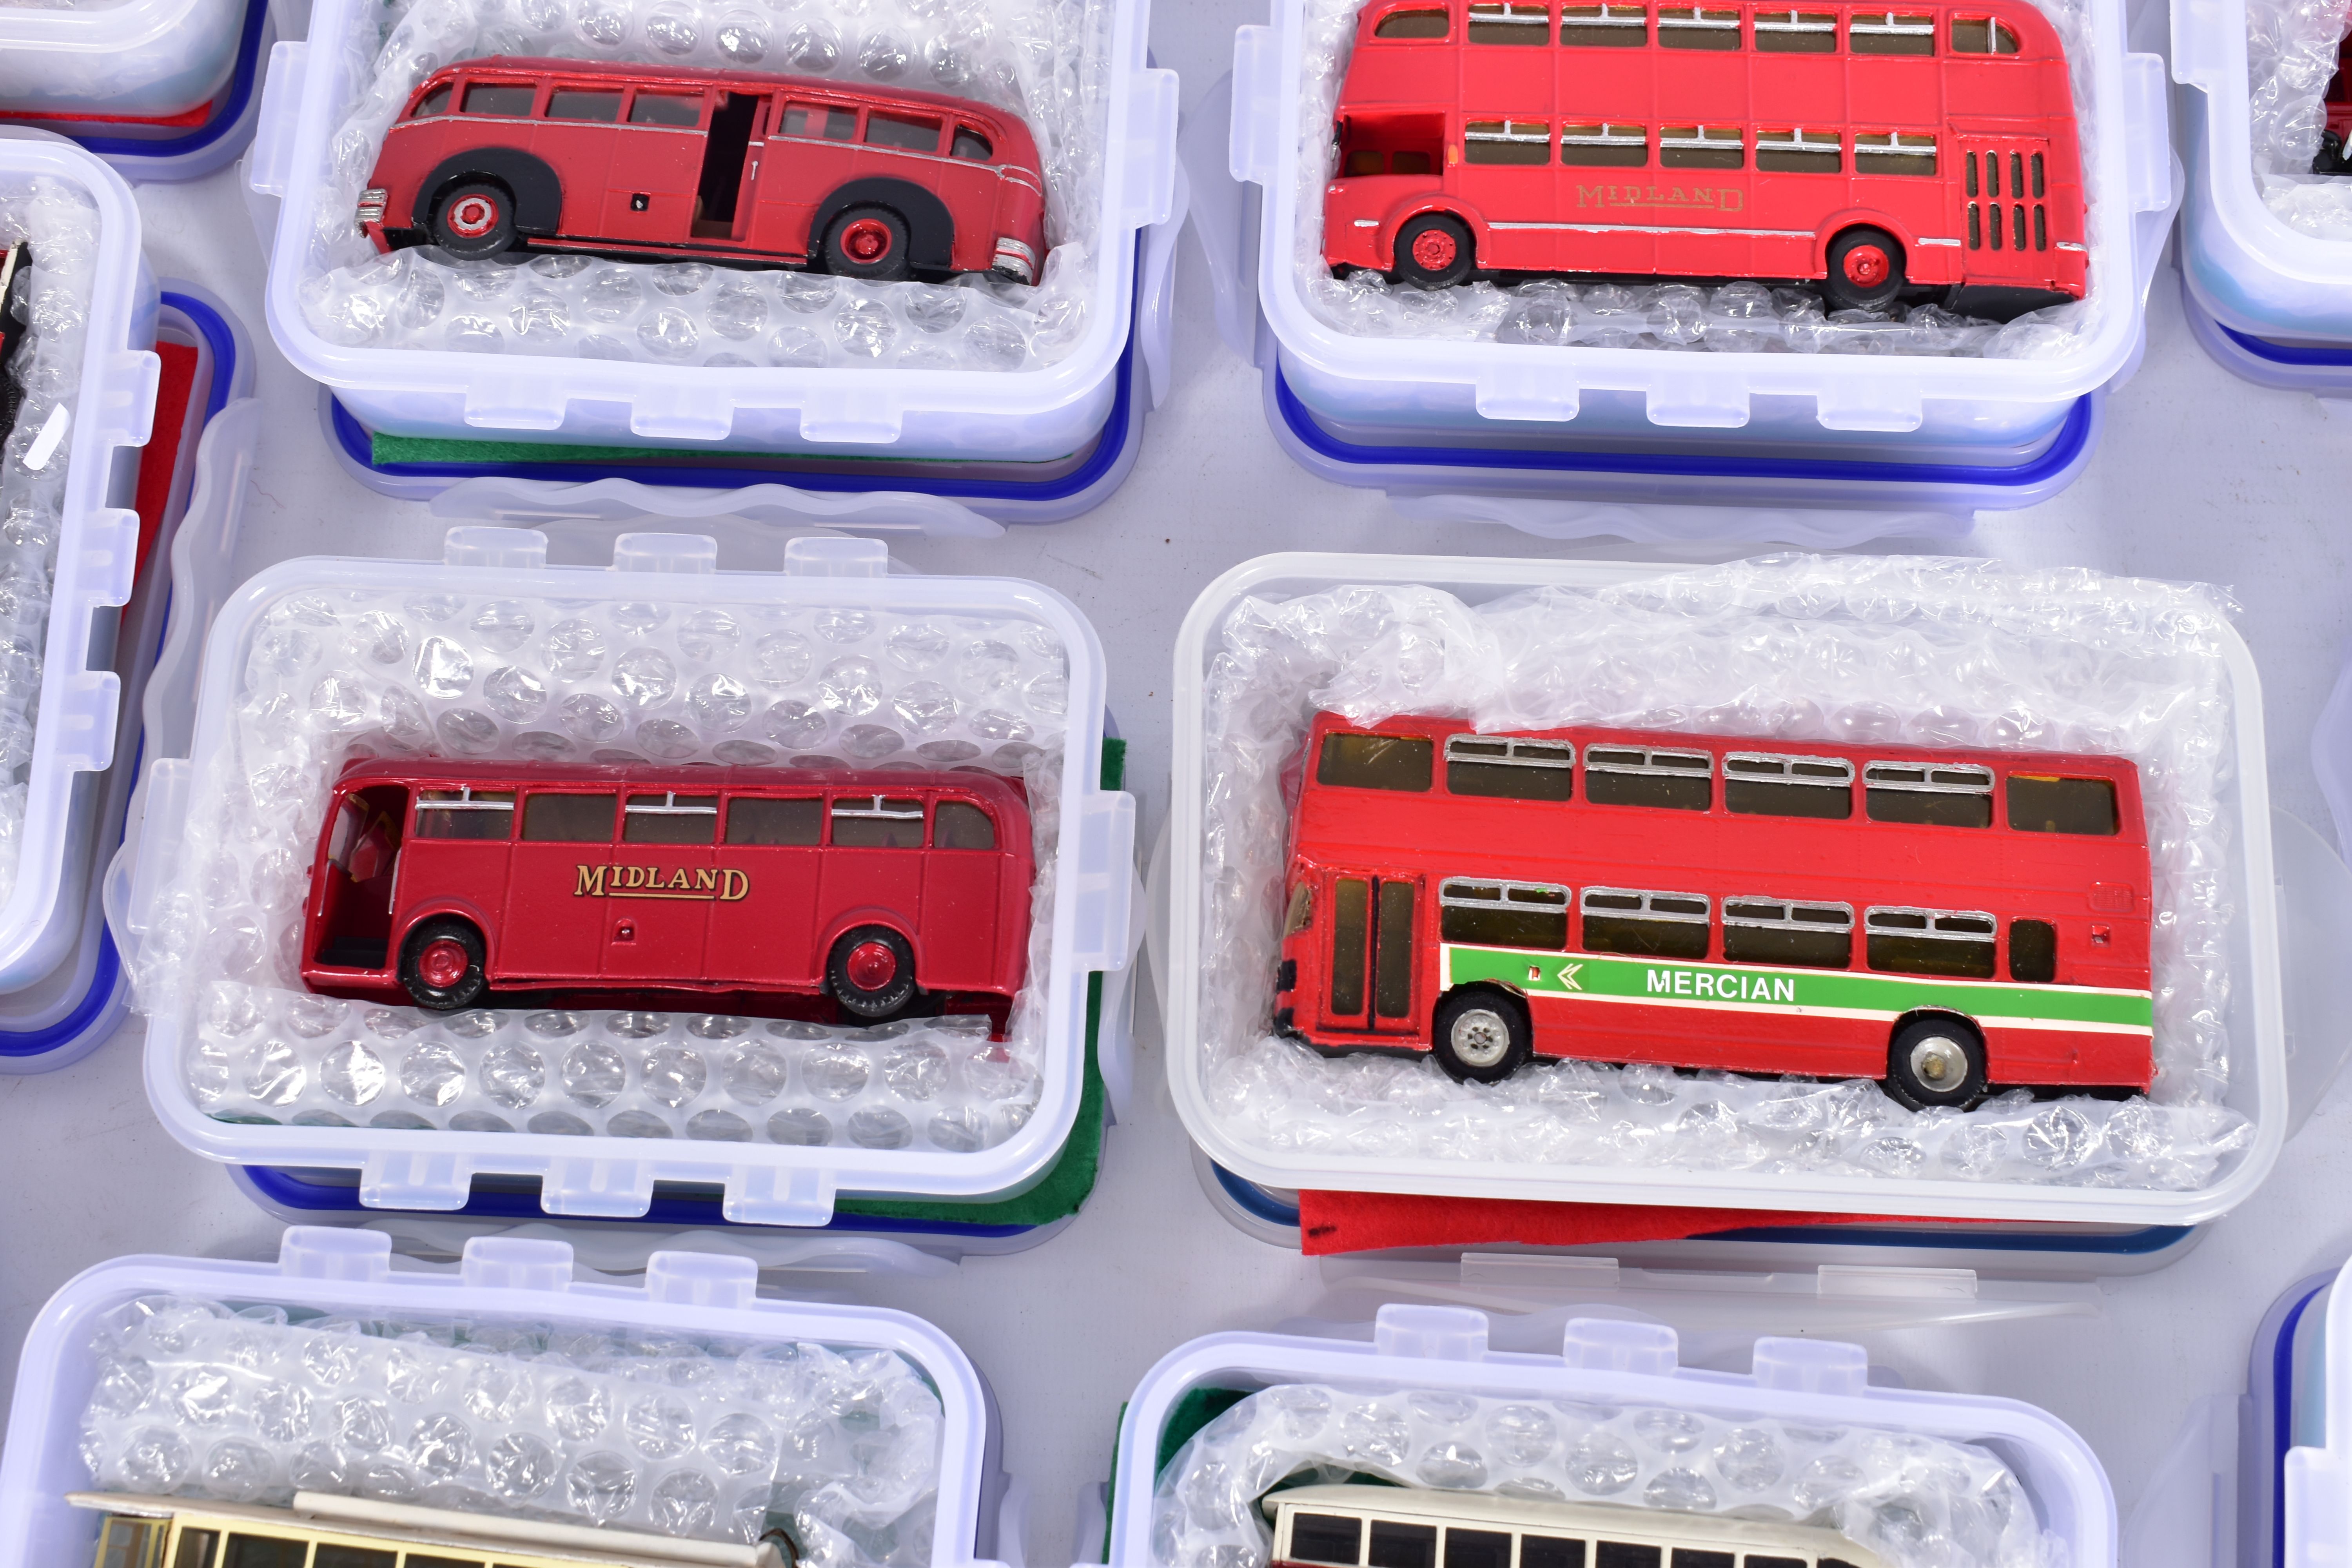 A COLLECTION OF CONSTRUCTED WHITEMETAL KIT MIDLAND RED BUS MODELS, all are 1/76 scale kit models and - Image 5 of 11